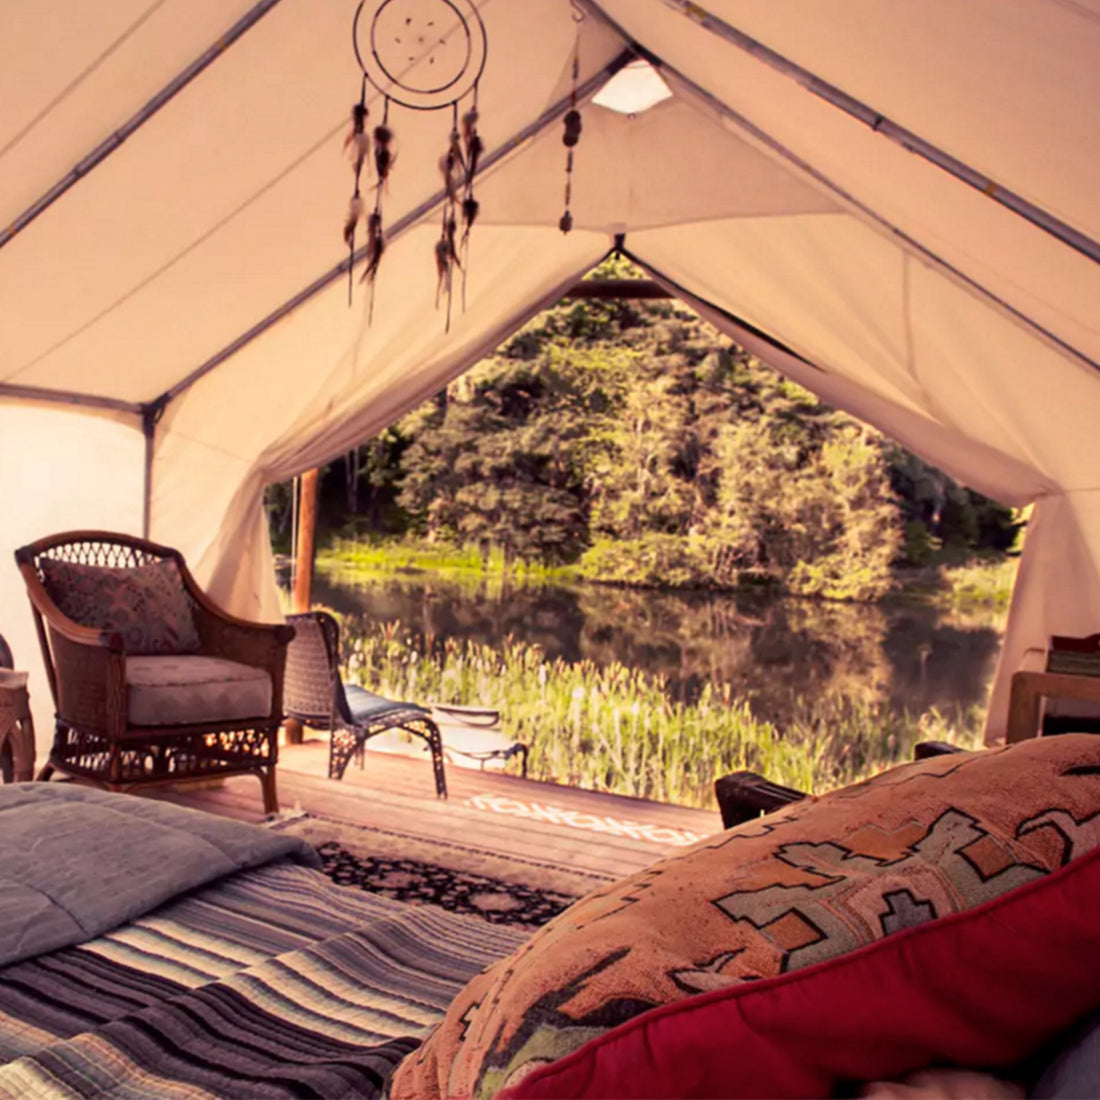 Our 7 favorite glamping rentals on airbnb!